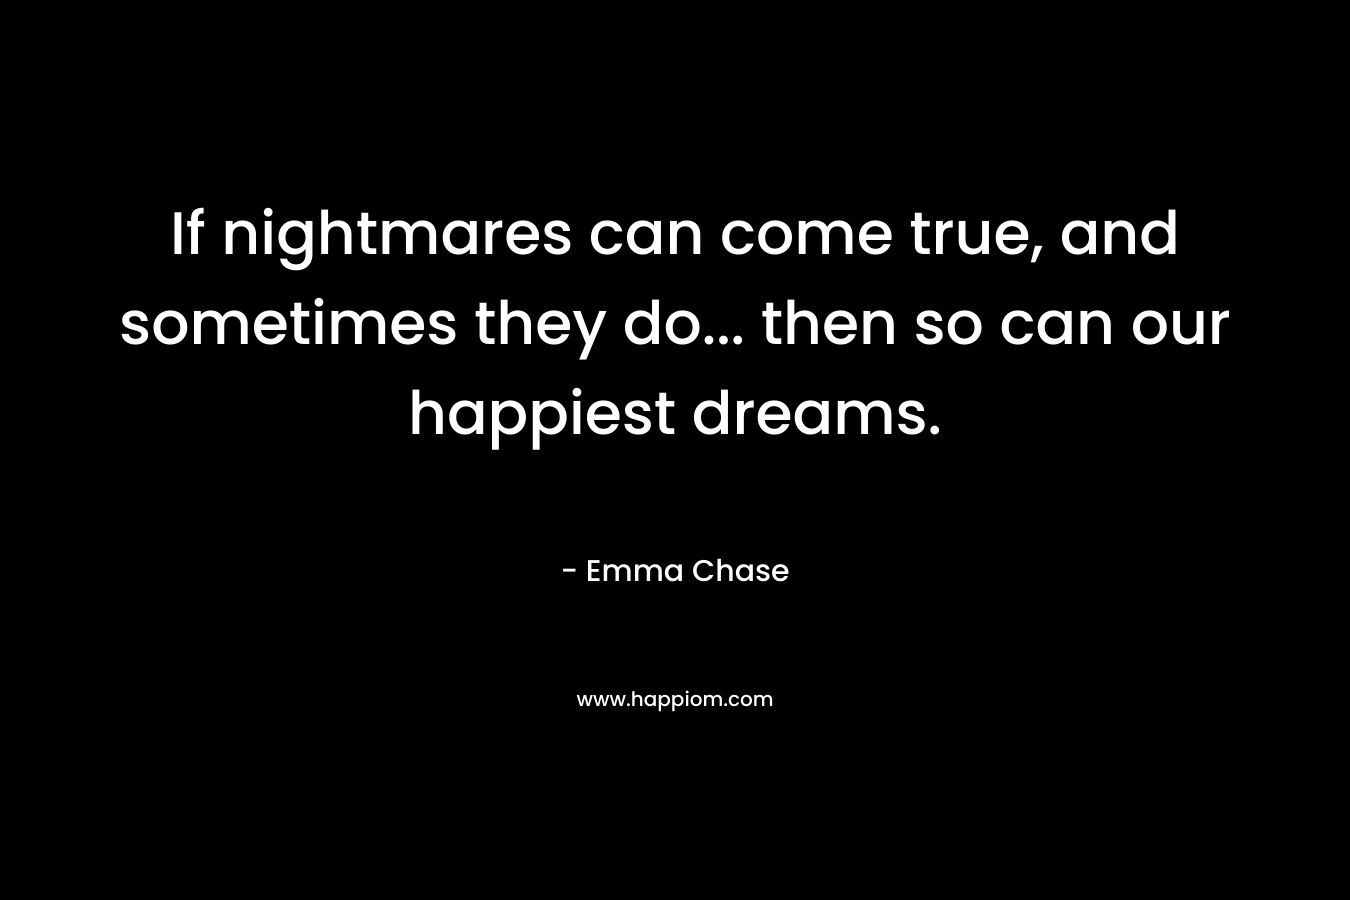 If nightmares can come true, and sometimes they do... then so can our happiest dreams.